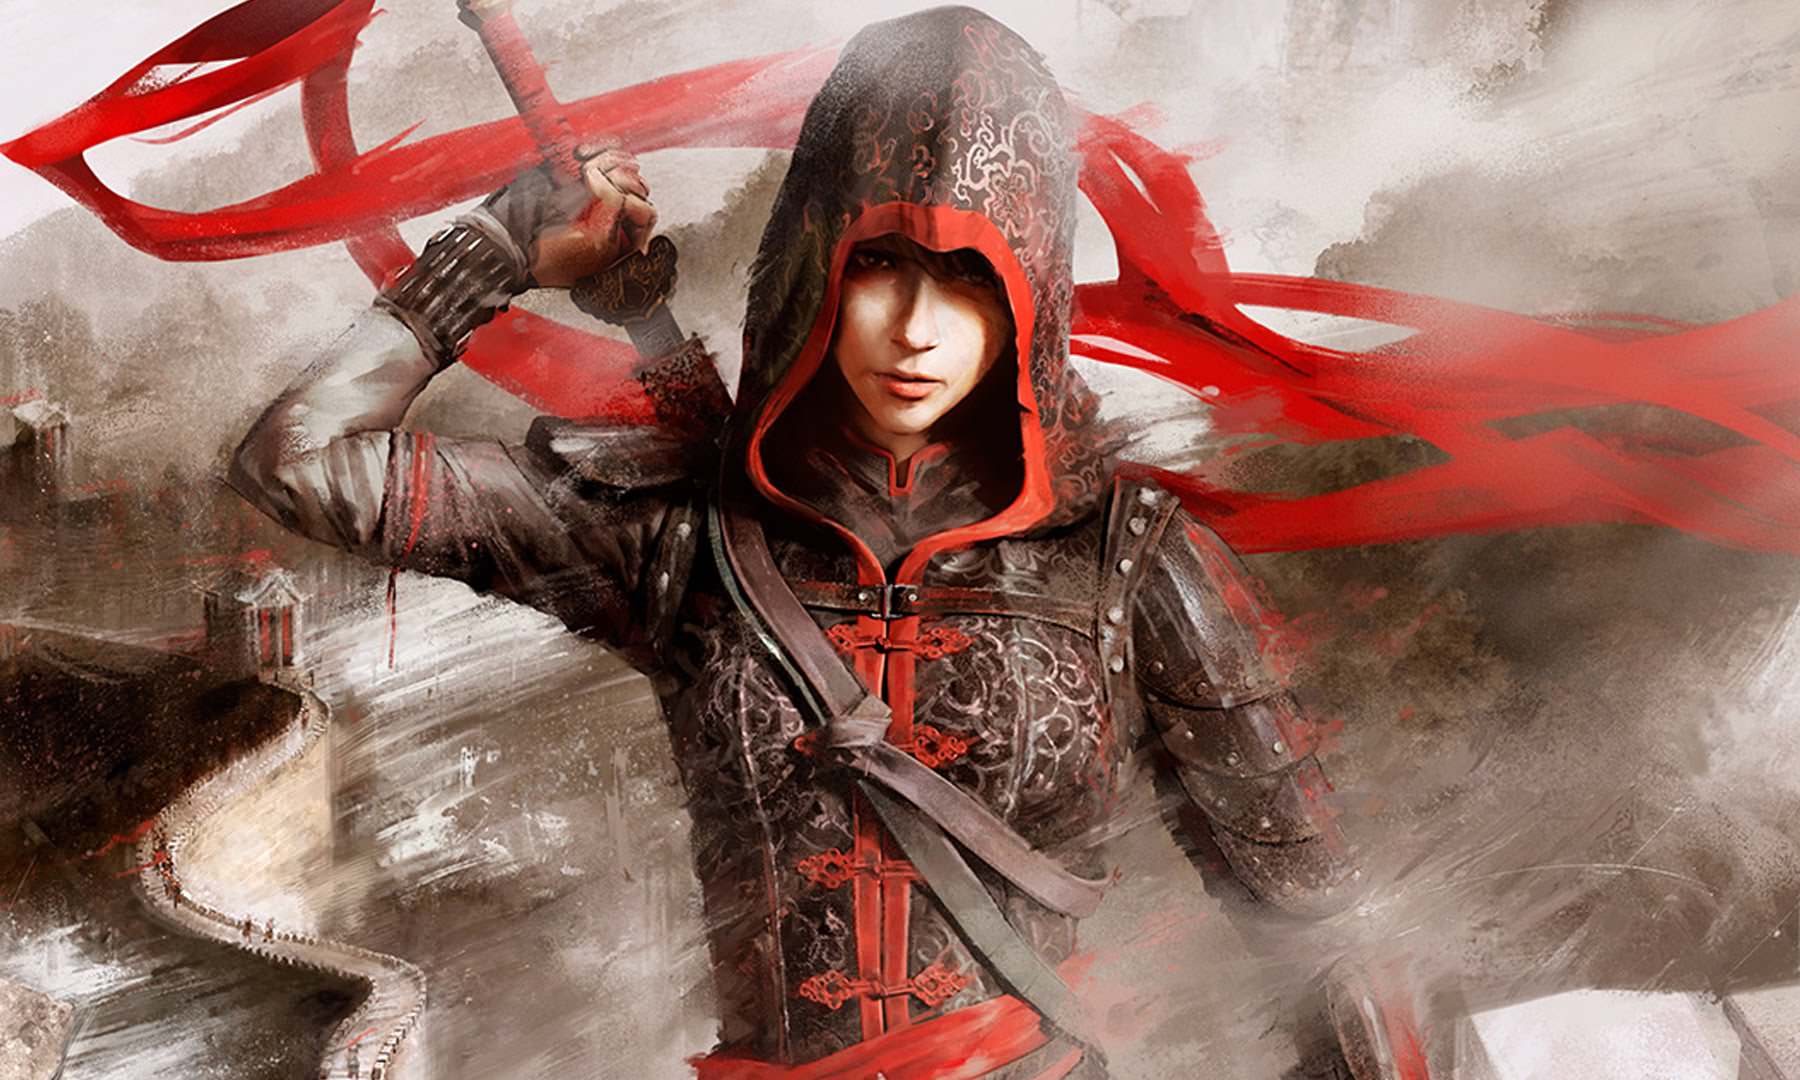 Female Assassin Wallpapers Top Free Female Assassin Backgrounds